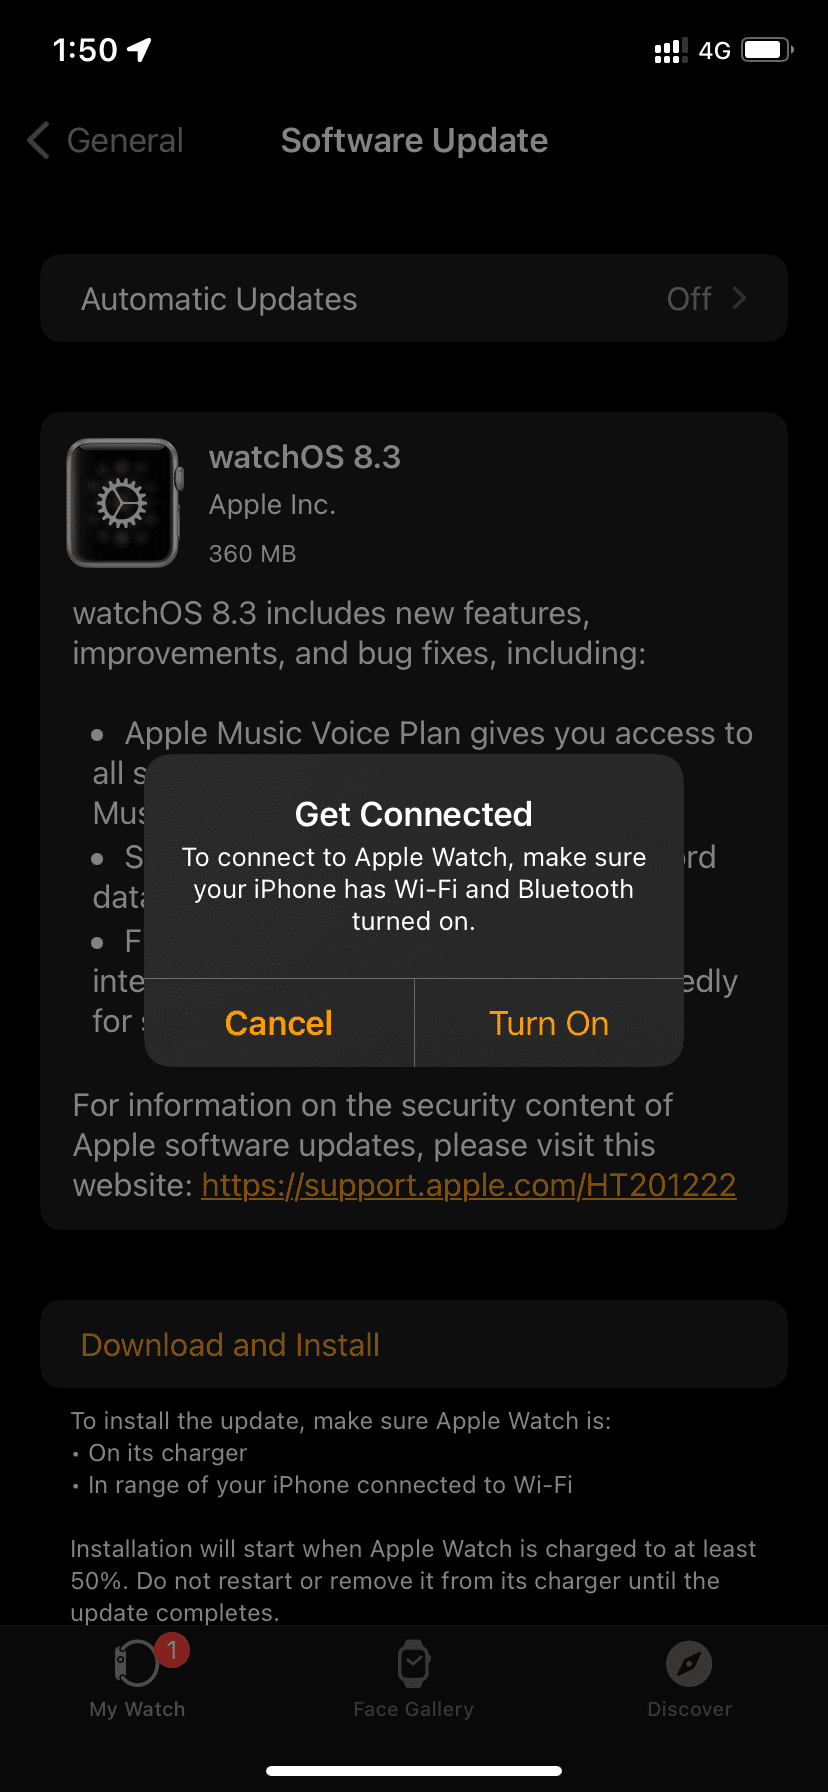 Get Connected to Apple Watch